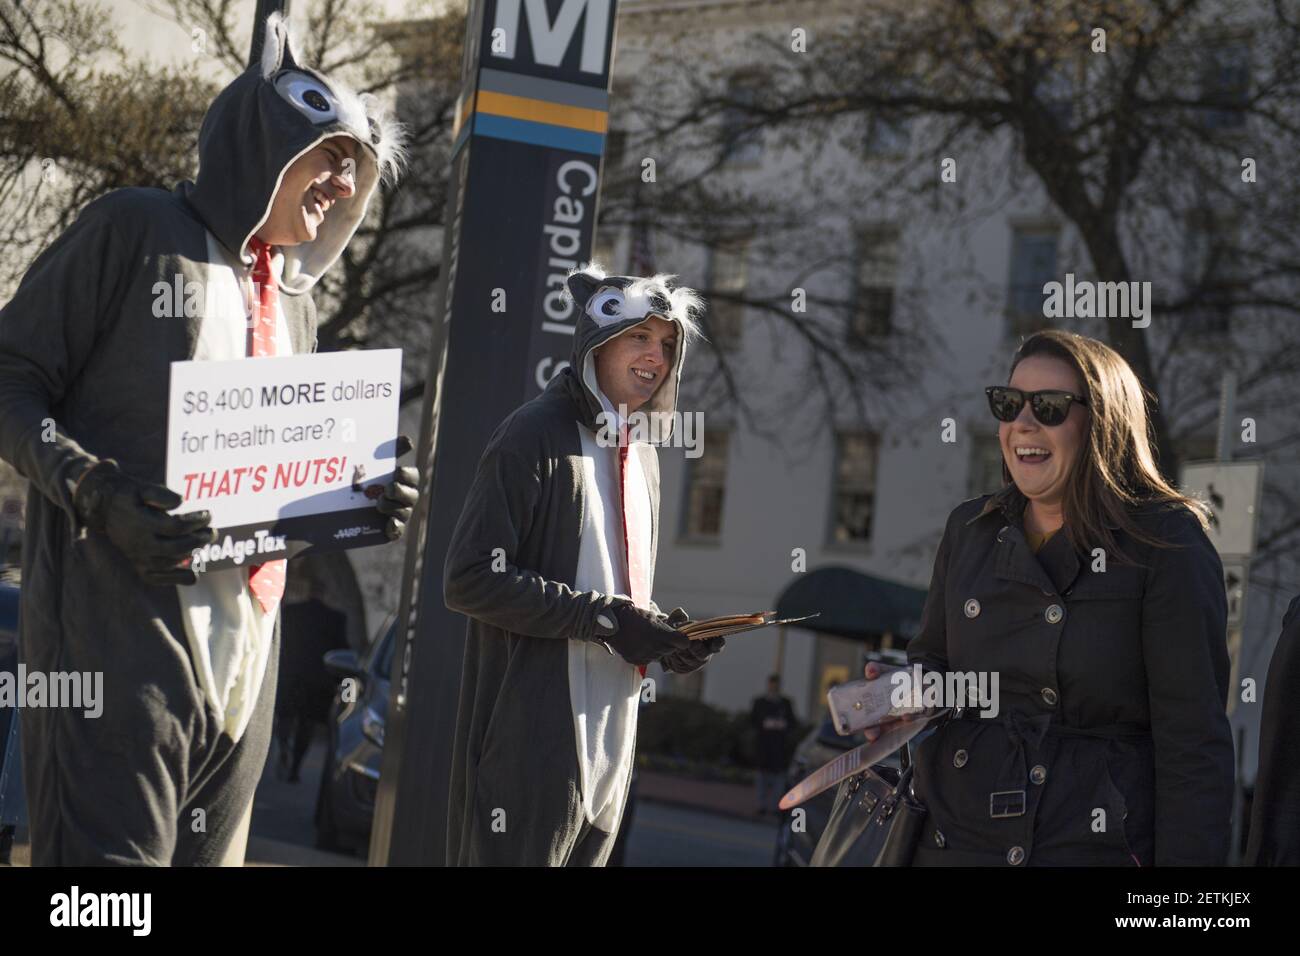 UNITED STATES - MARCH 23: Employees of AARP, who were dressed as squirrels, handout literature outside the Capitol South metro station opposing the 'age tax' in the Republican's American Health Care Act, March 23, 2017. The tax would increase premiums in people over age 50. (Photo By Tom Williams/CQ Roll Call) *** Please Use Credit from Credit Field *** Stock Photo